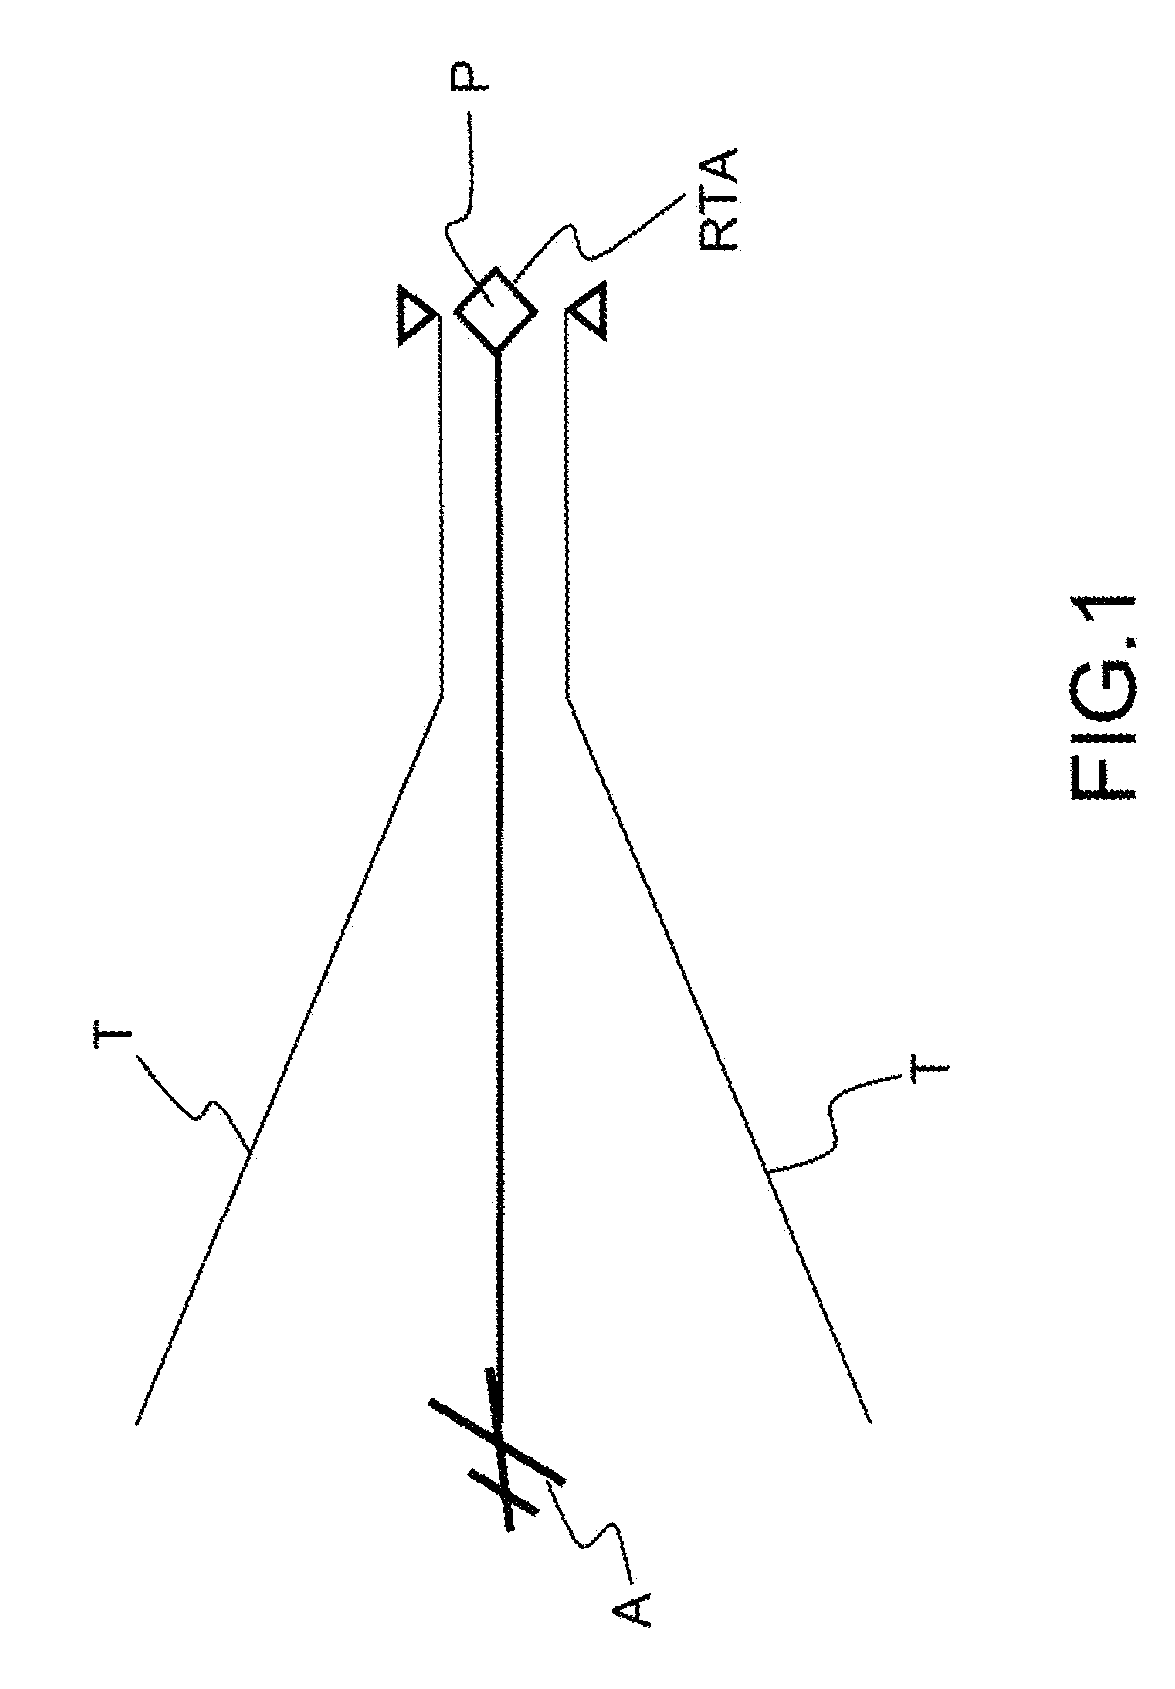 Method for assisting in the management of the flight of an aircraft in order to keep to a time constraint